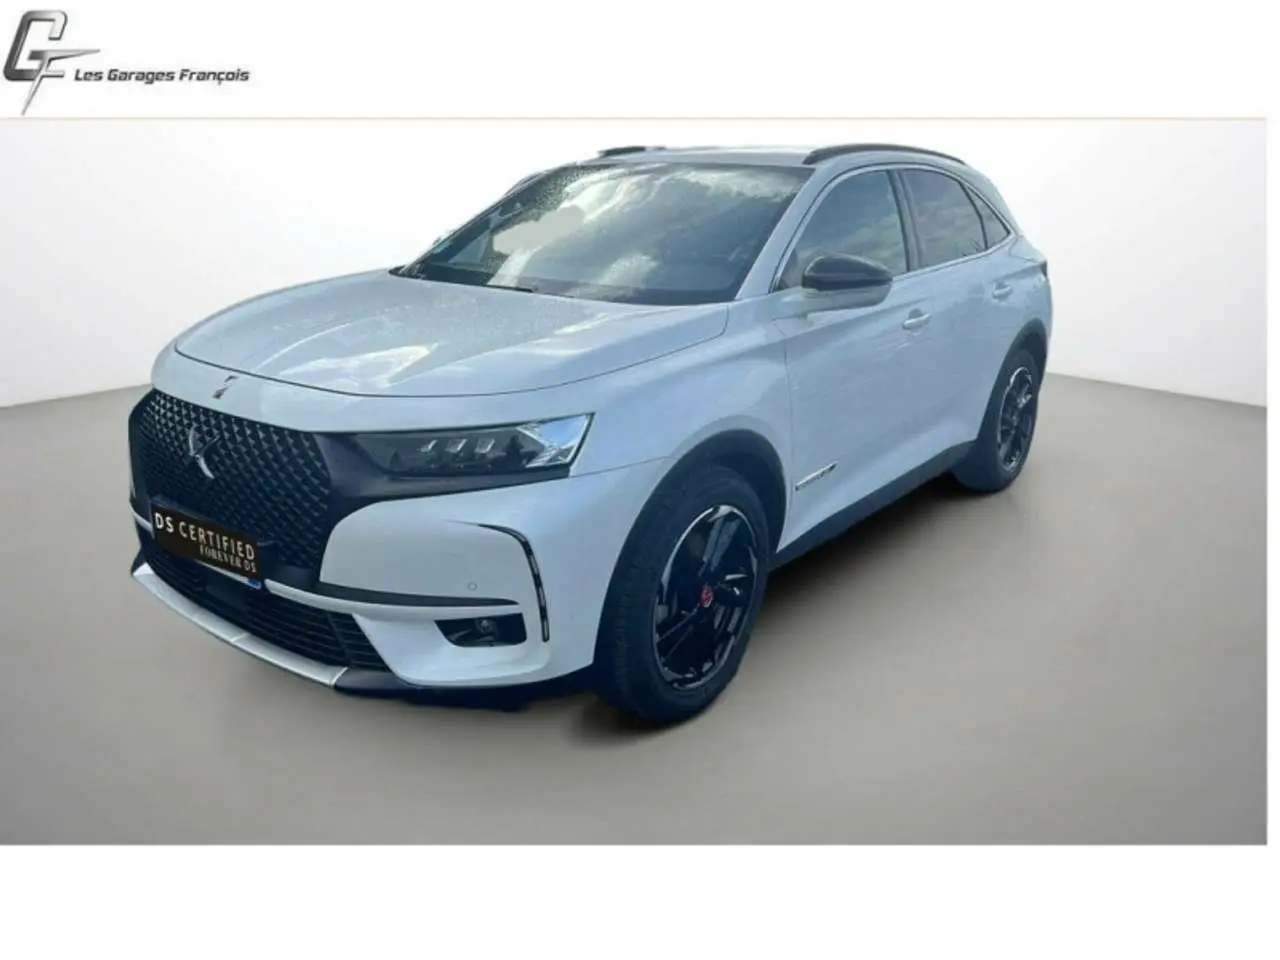 Photo 1 : Ds Automobiles Ds7 2021 Others